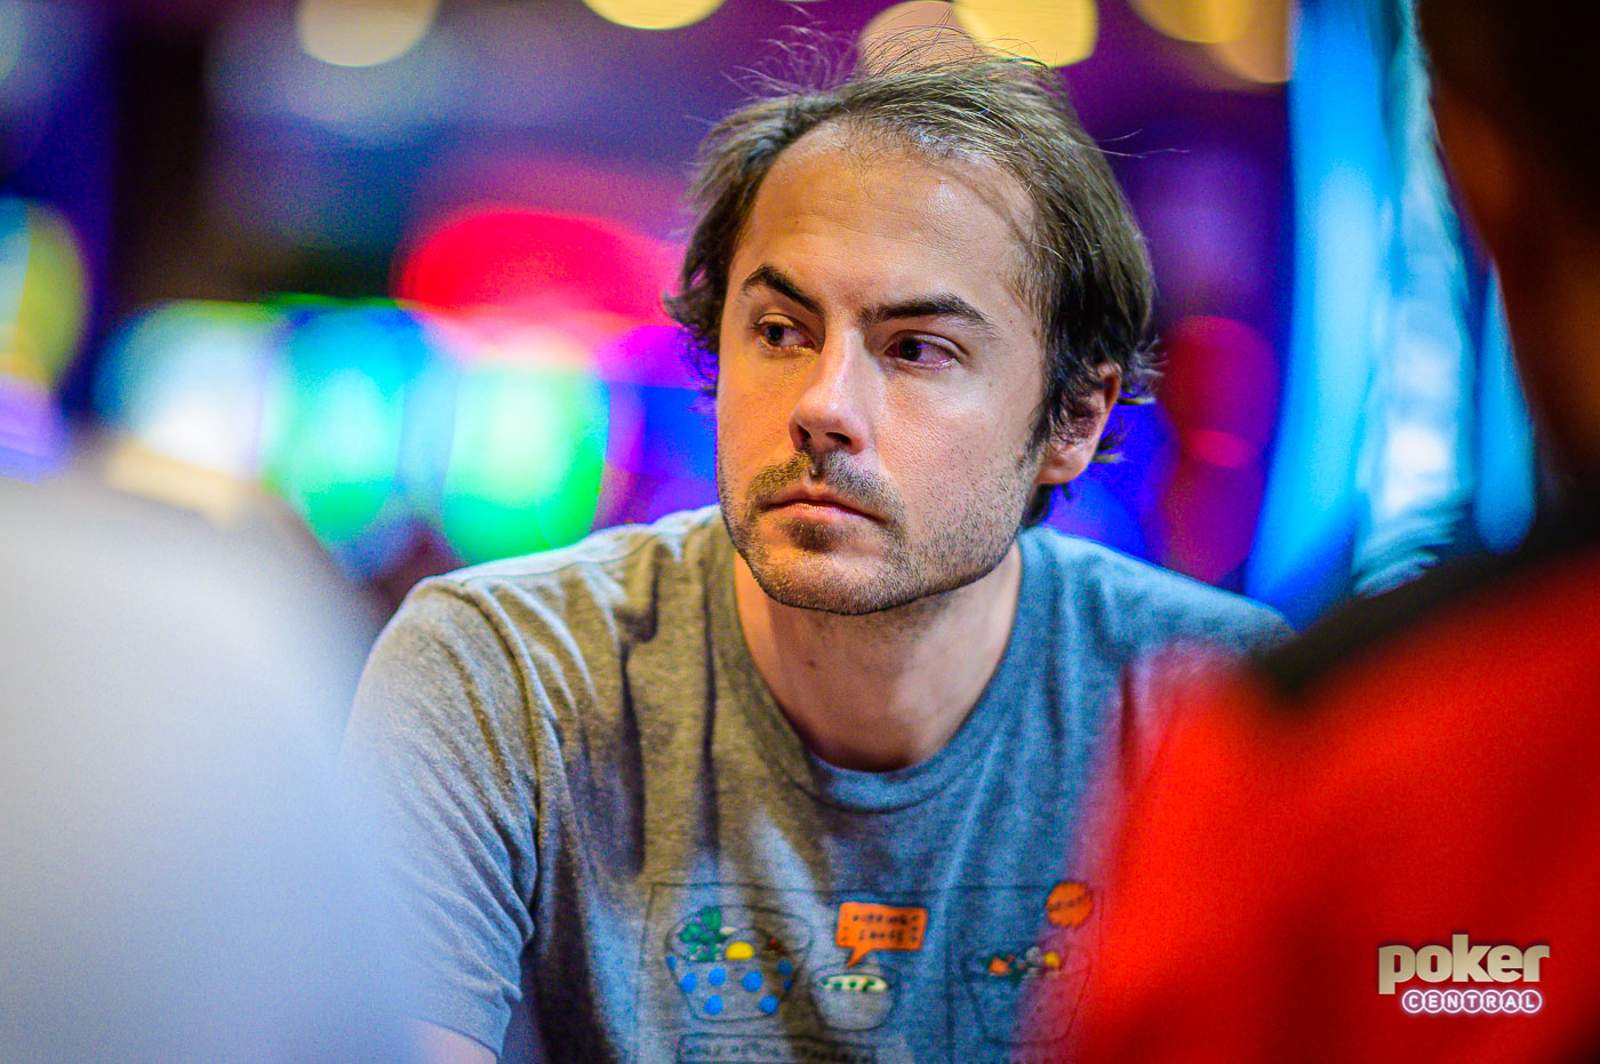 Elio Fox Finishes Top, Imsirovic Second Heading to Event #6 Final Table